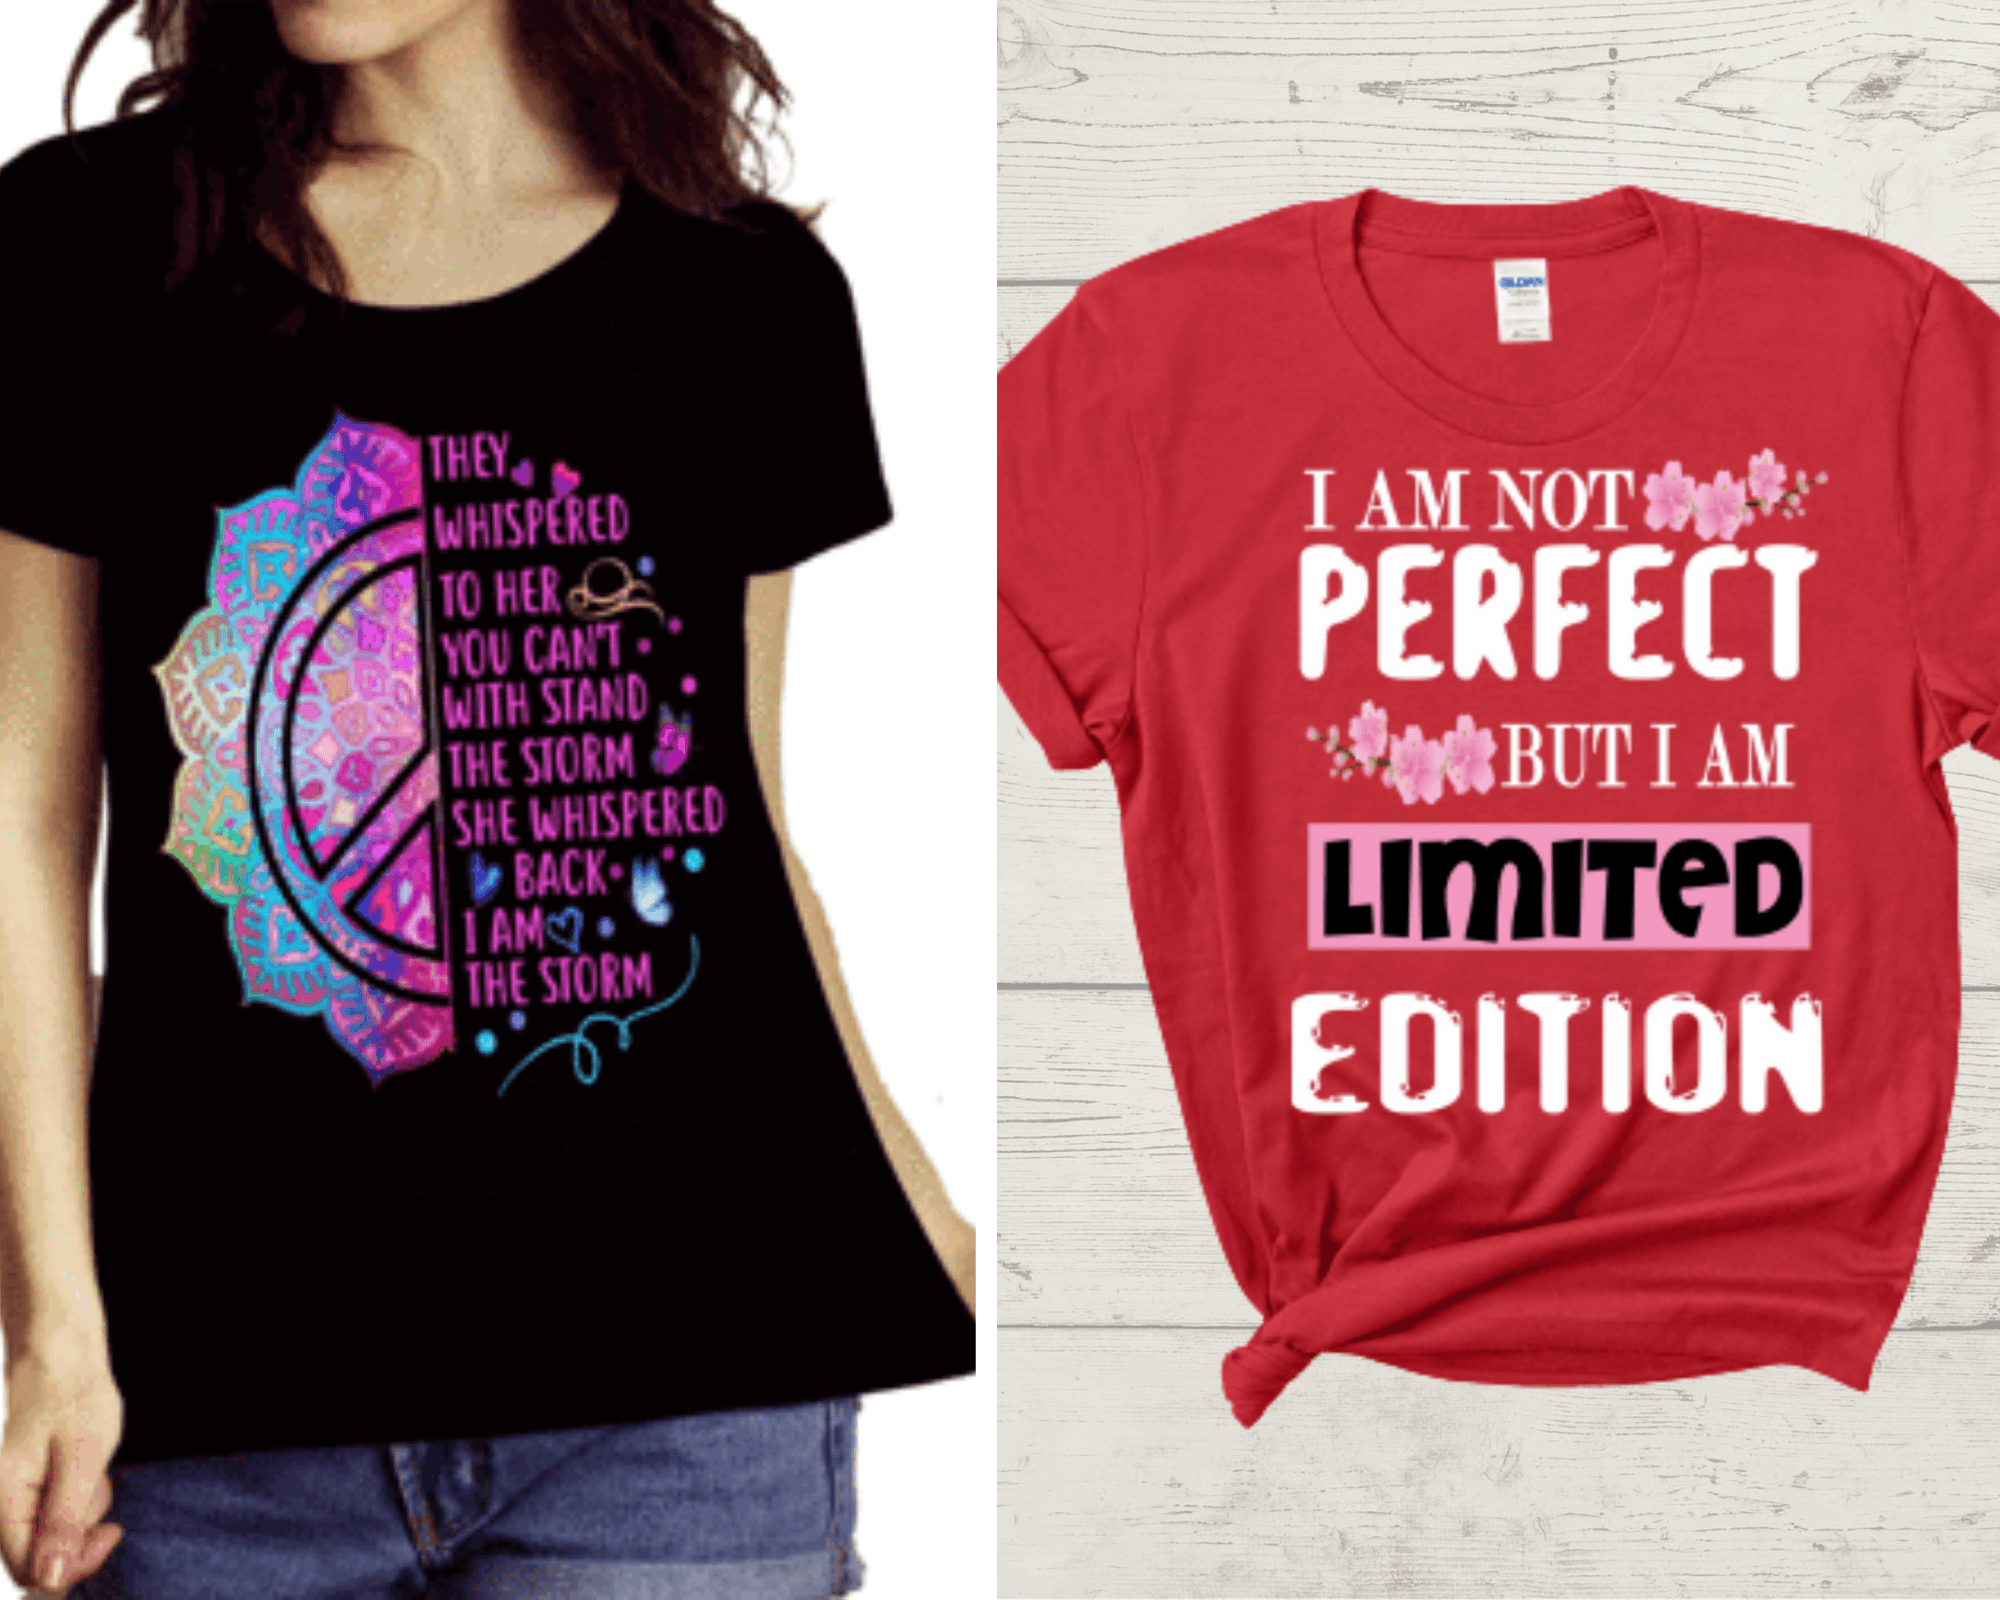 "2 Awesome Designs Combo- Perfect Edition + Whispered Back"